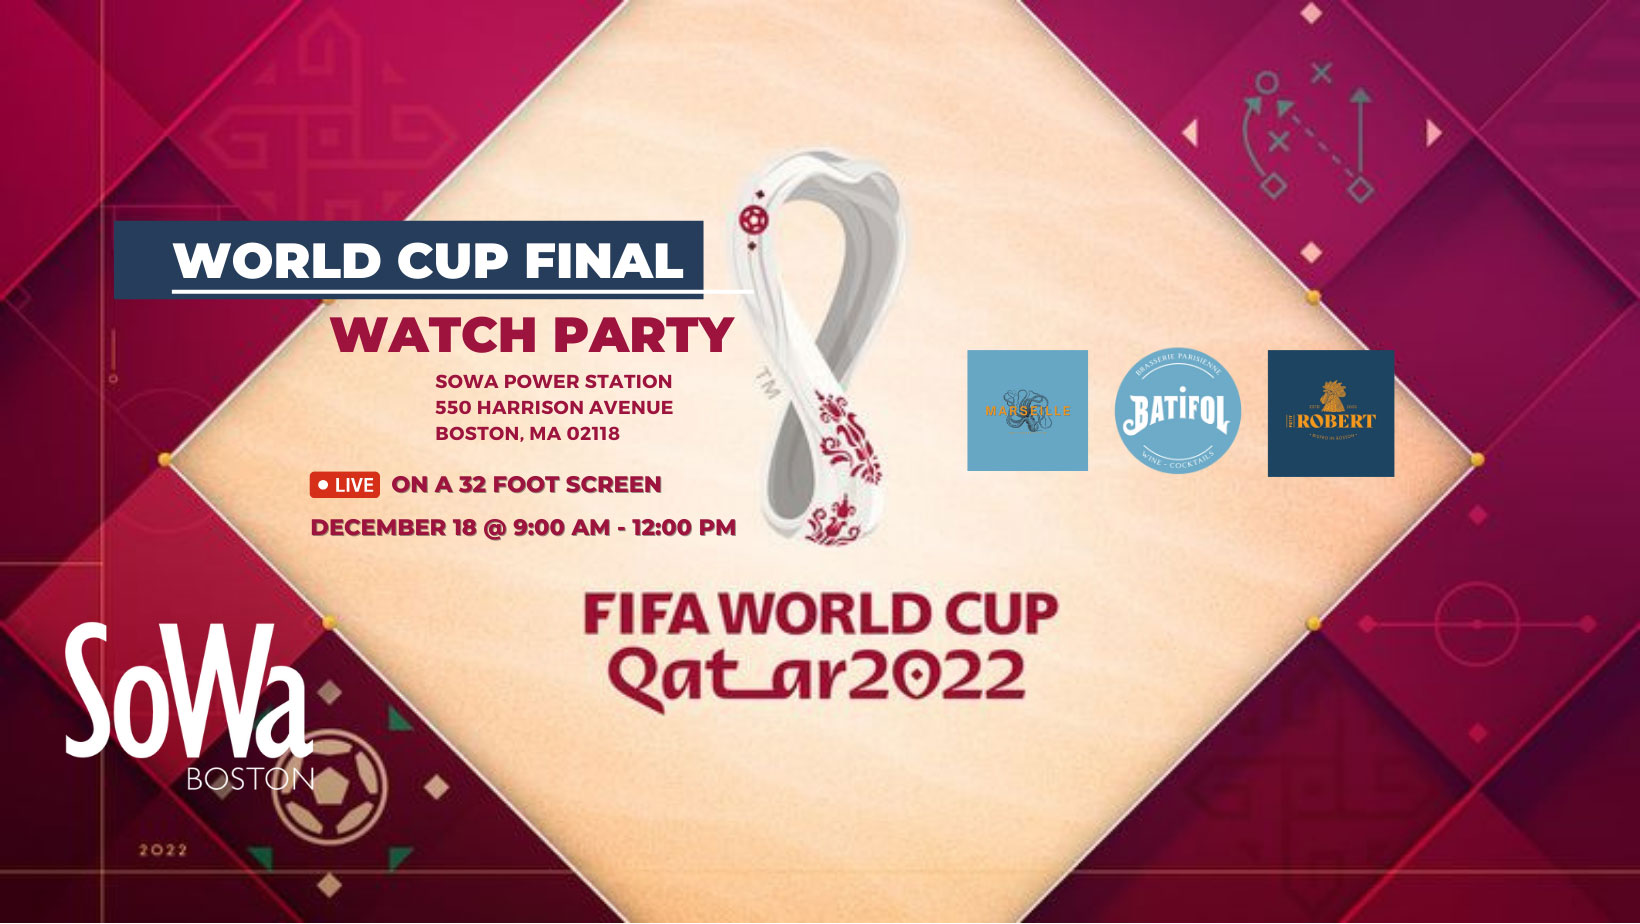 World Cup Final Watch Party SoWa Power Station